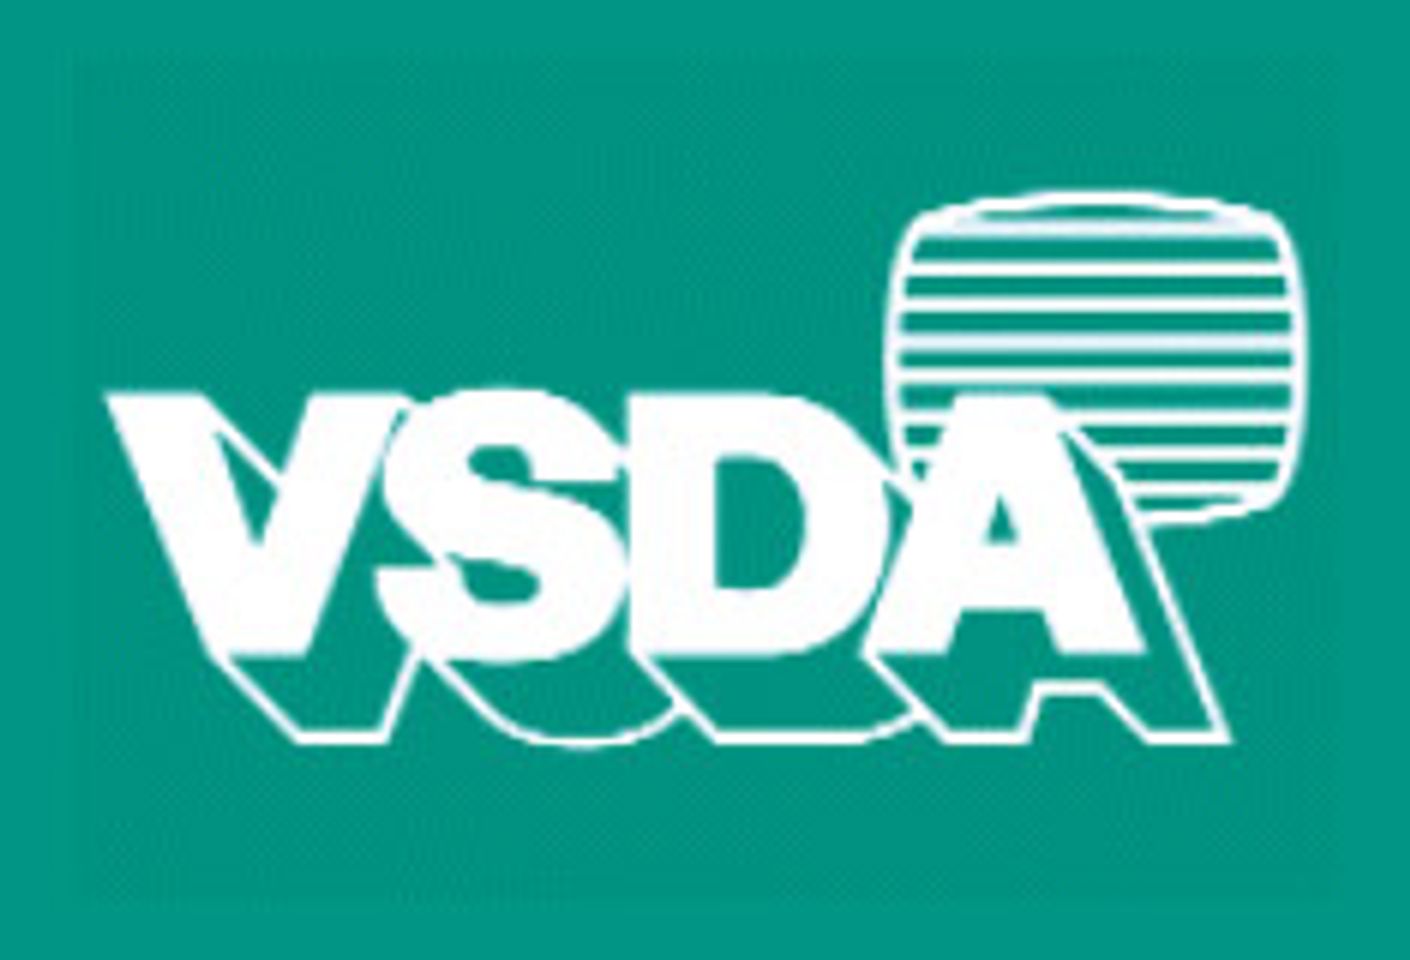 VSDA Names Co-Chairs for Home Entertainment 2006